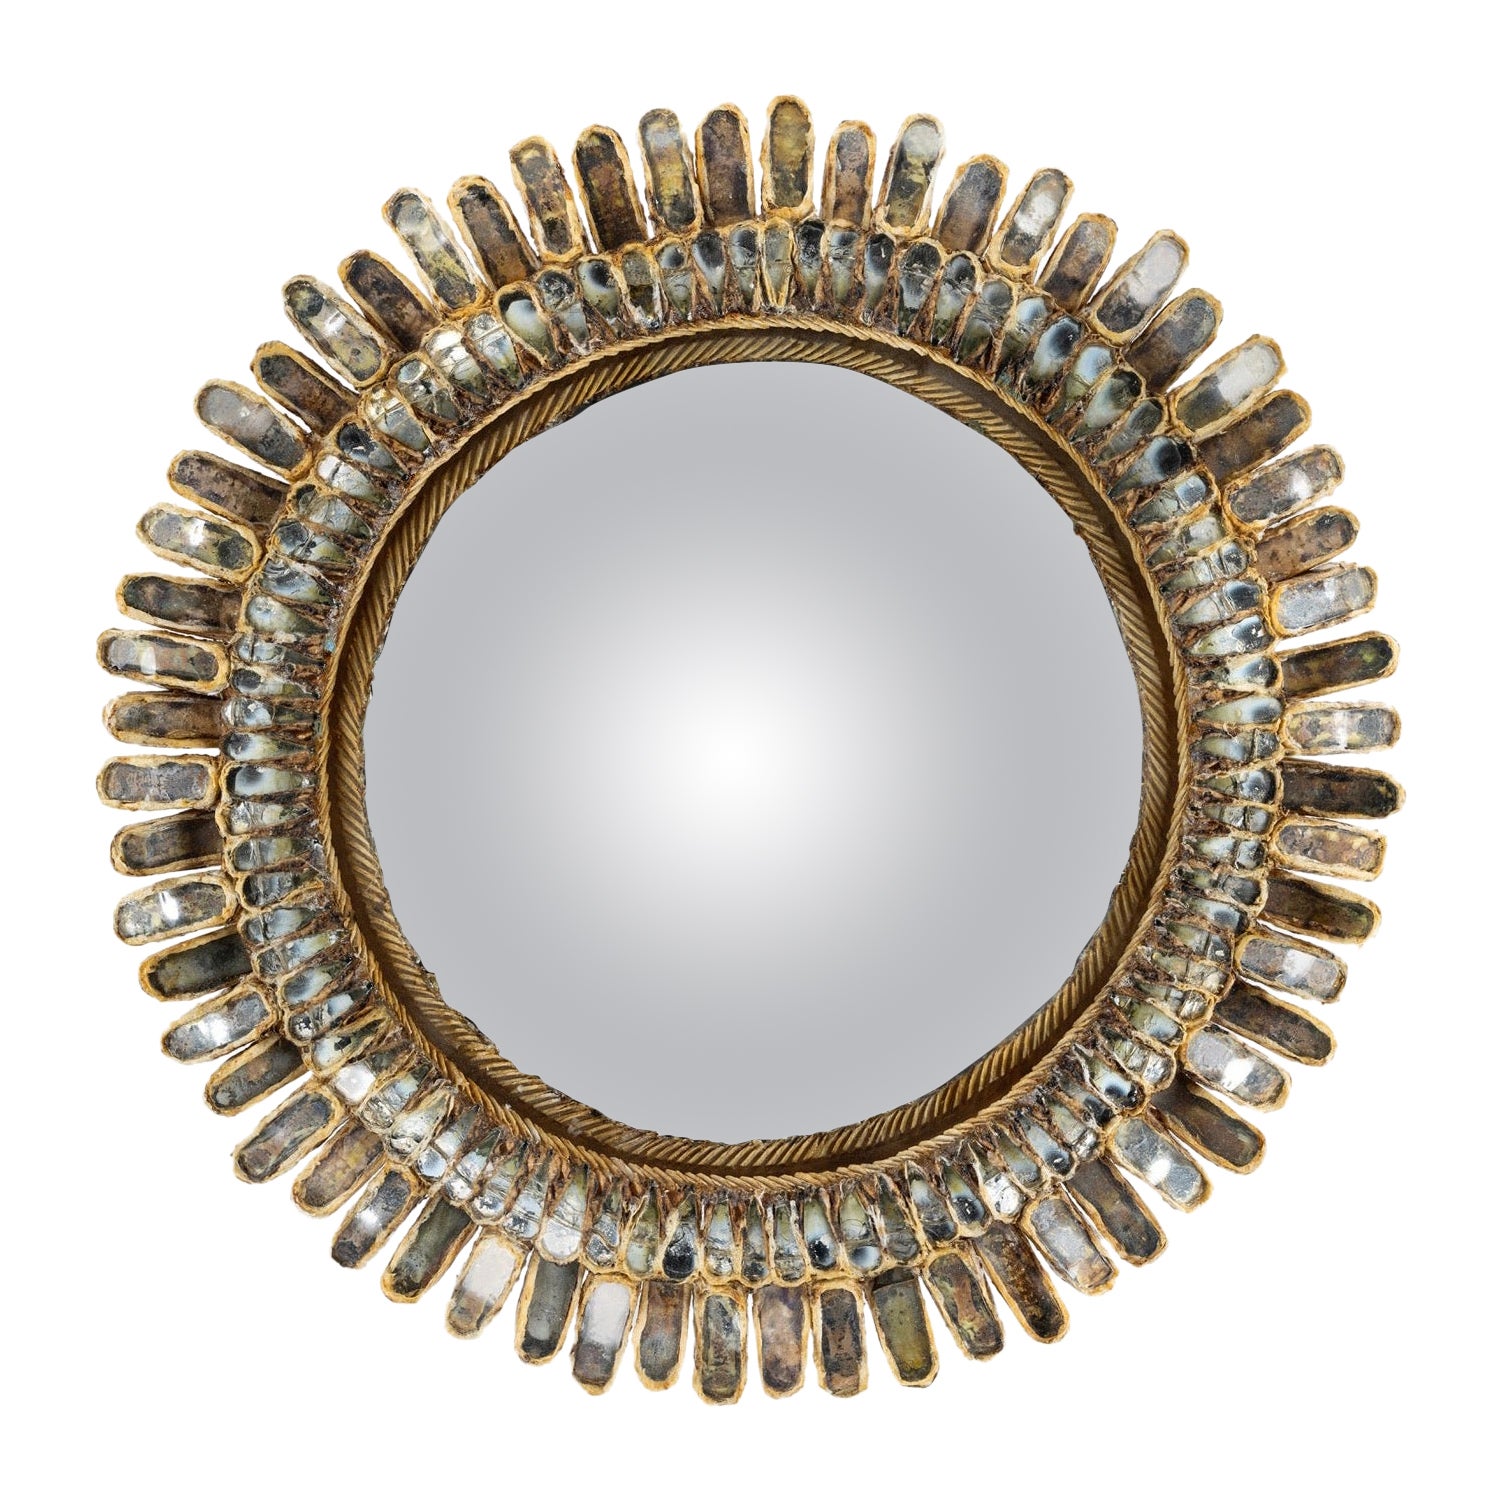 Marguerite by Line Vautrin, Light Beige Talosel Mirror Inlaid with Silver Gray